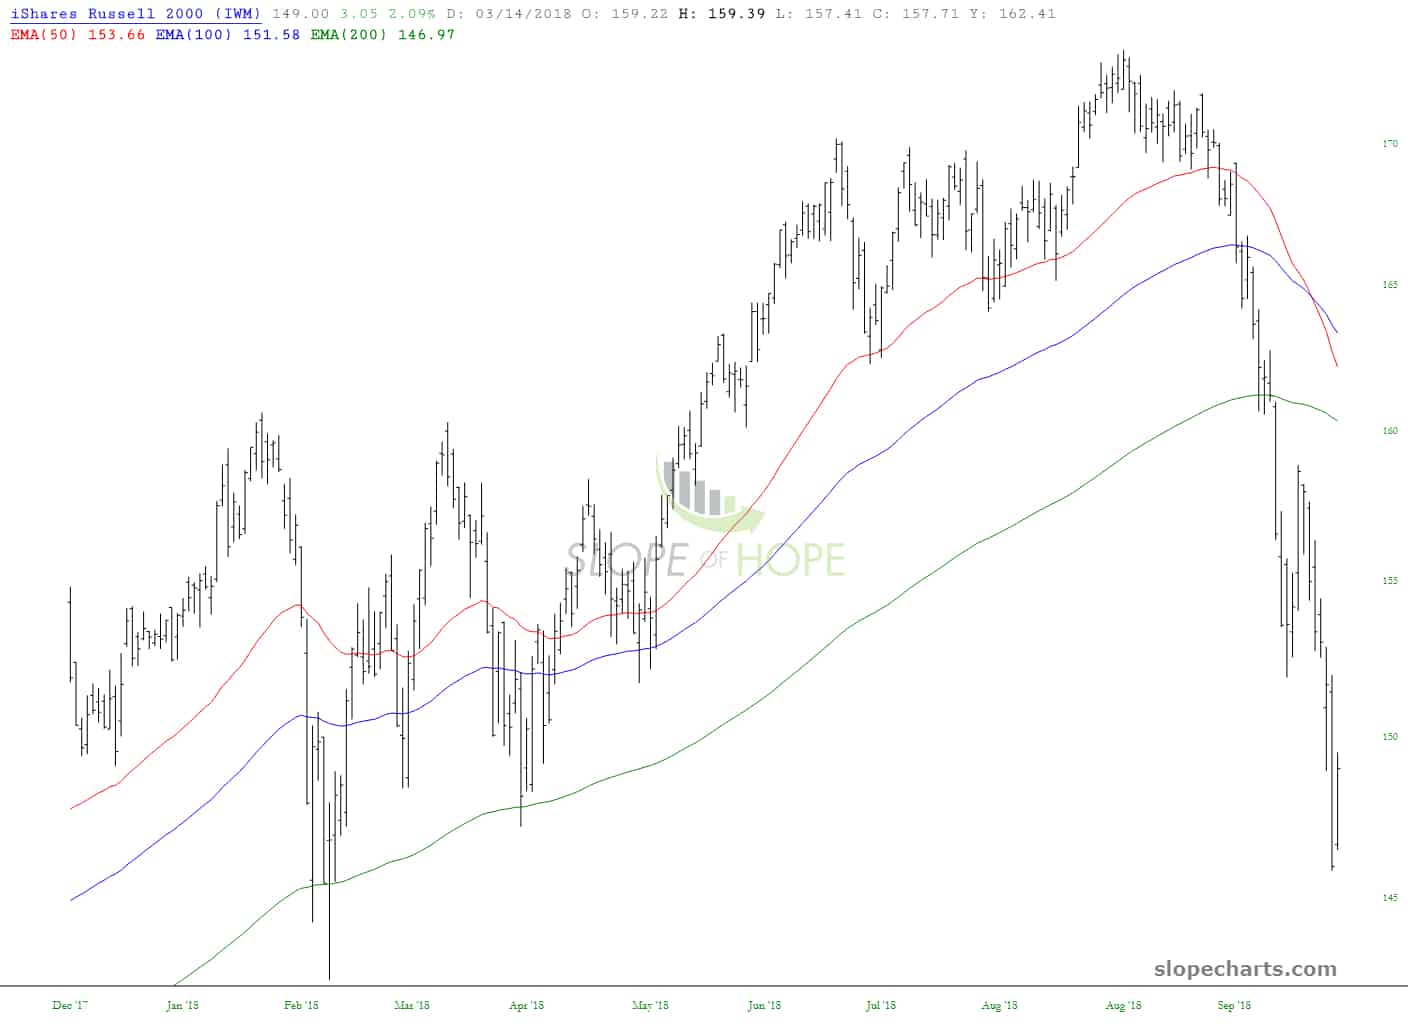 iShares Russell 2000